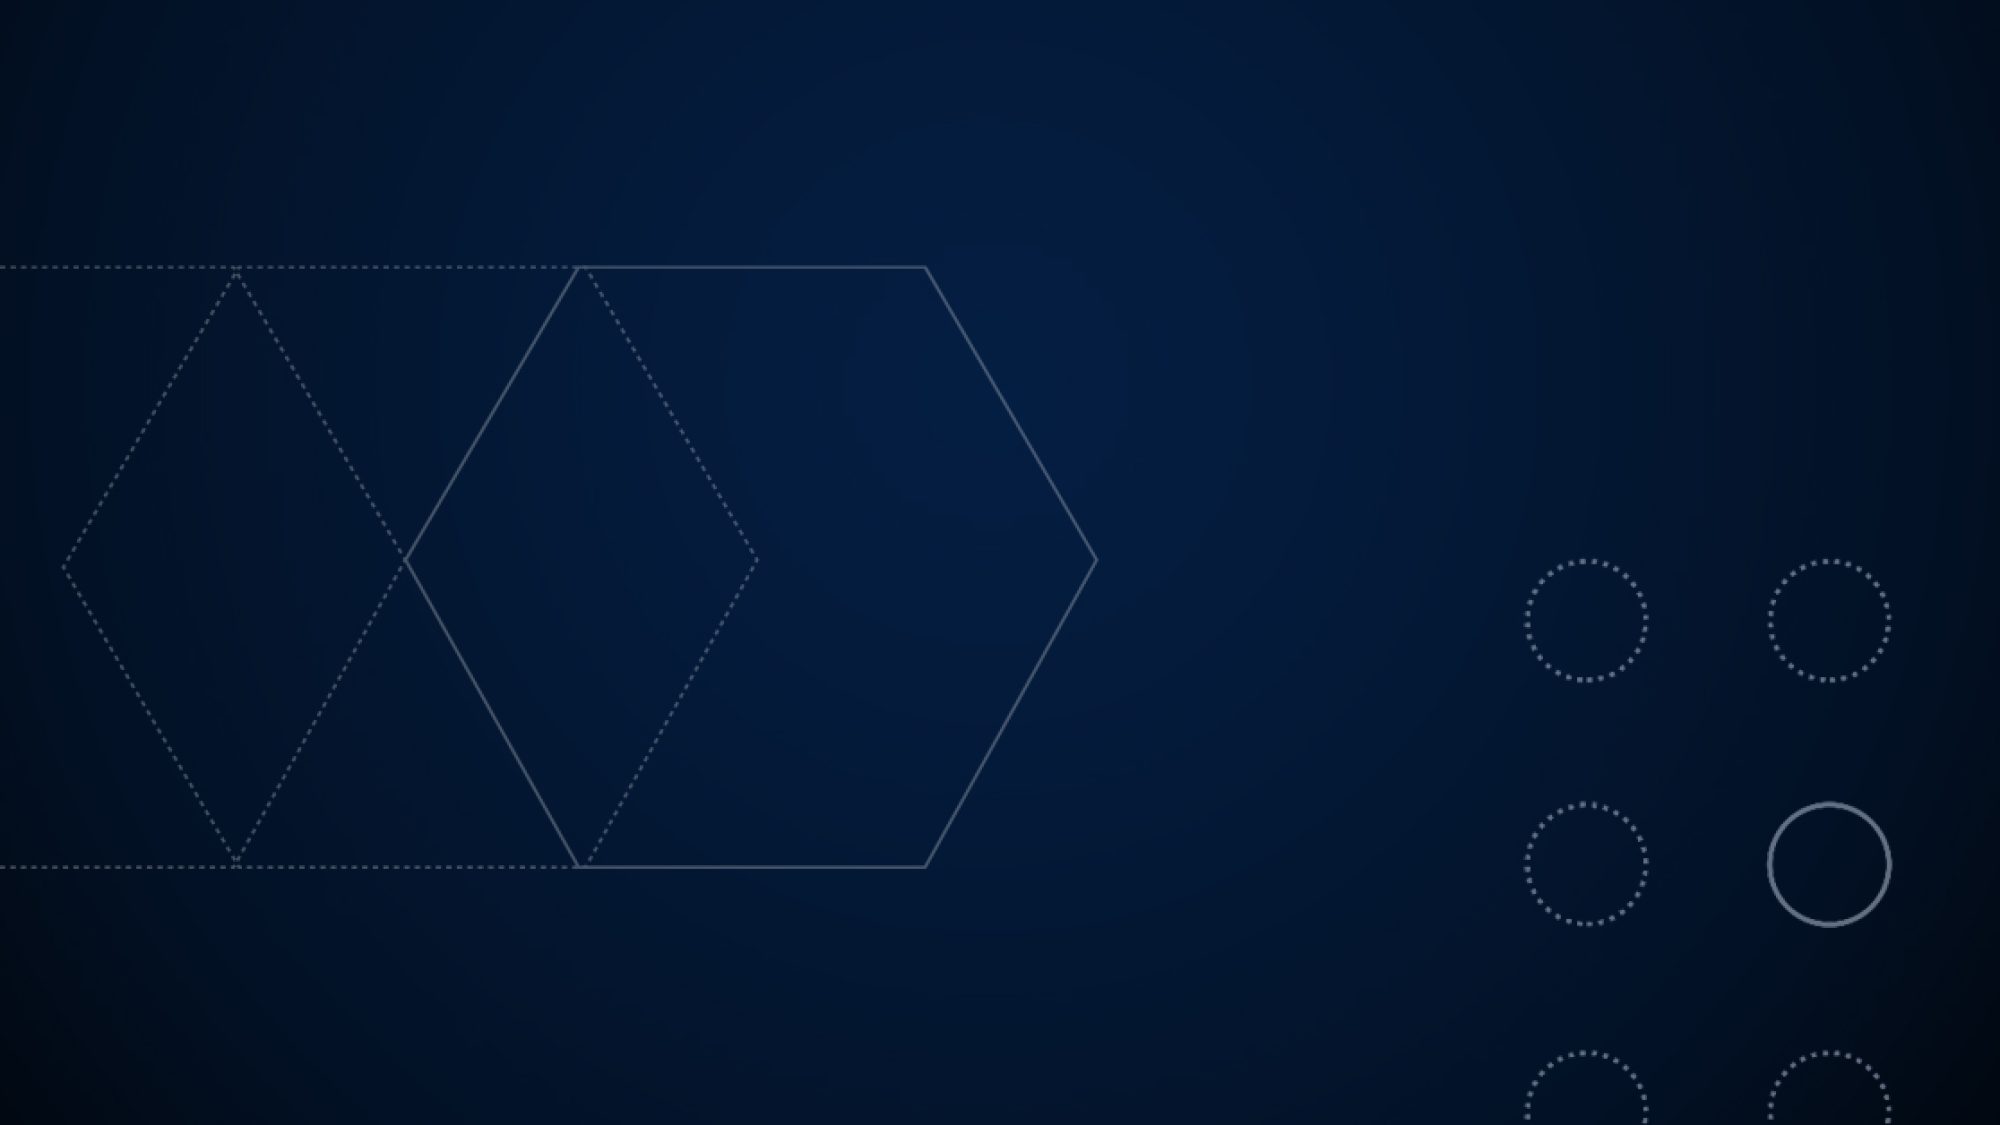 Outlines of hexagons and circles on a dark blue background.